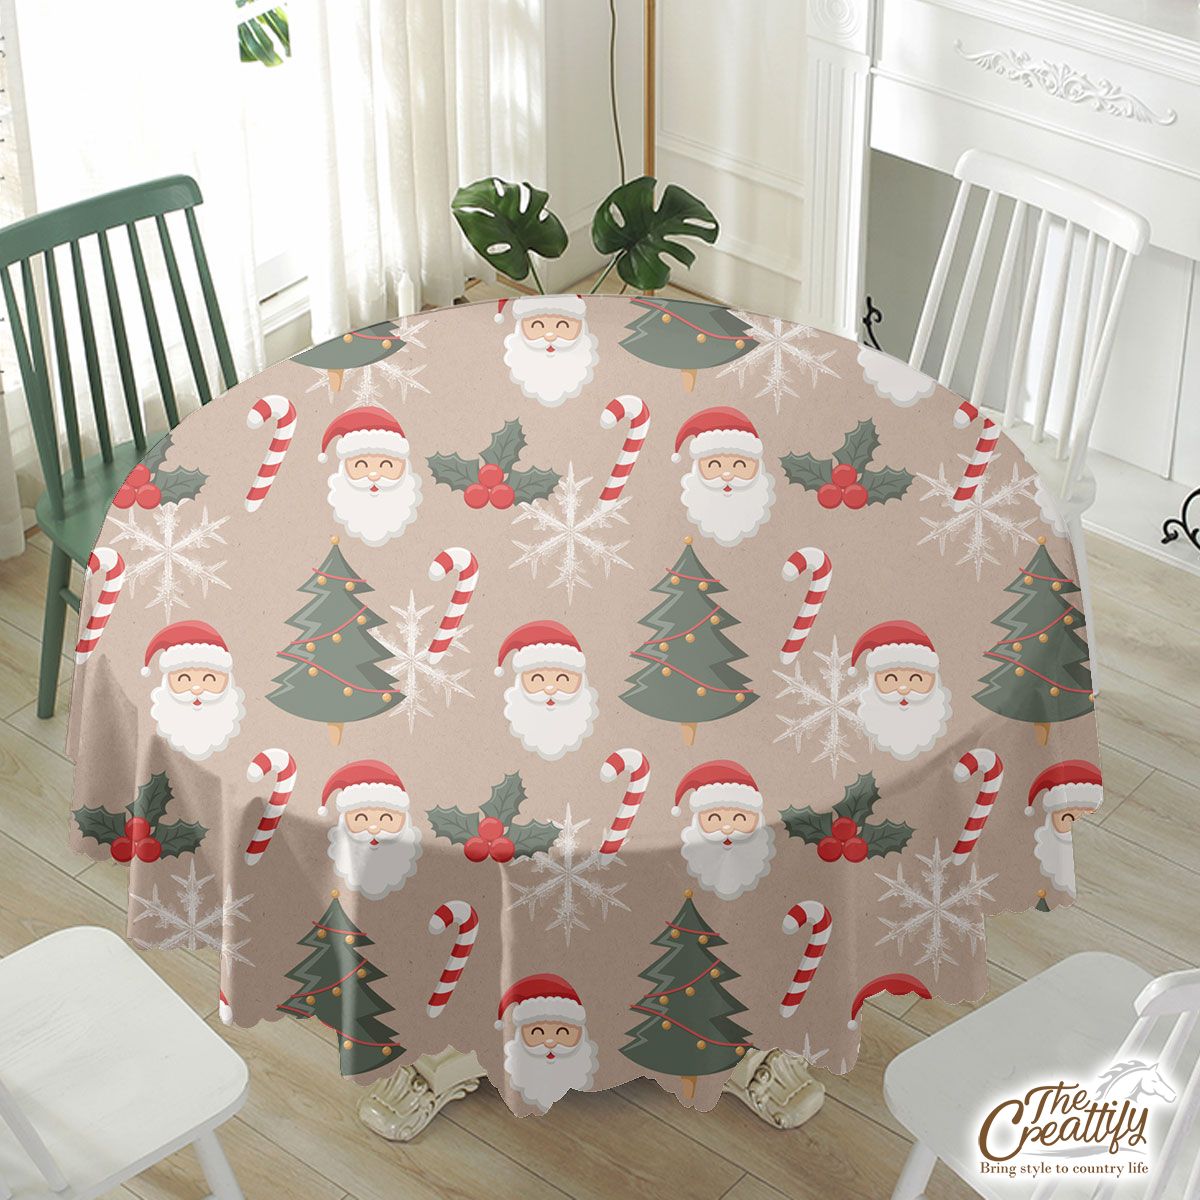 Santa Clause, Christmas Tree, Candy Cane, Holly Leaf On Snowflake Background Waterproof Tablecloth